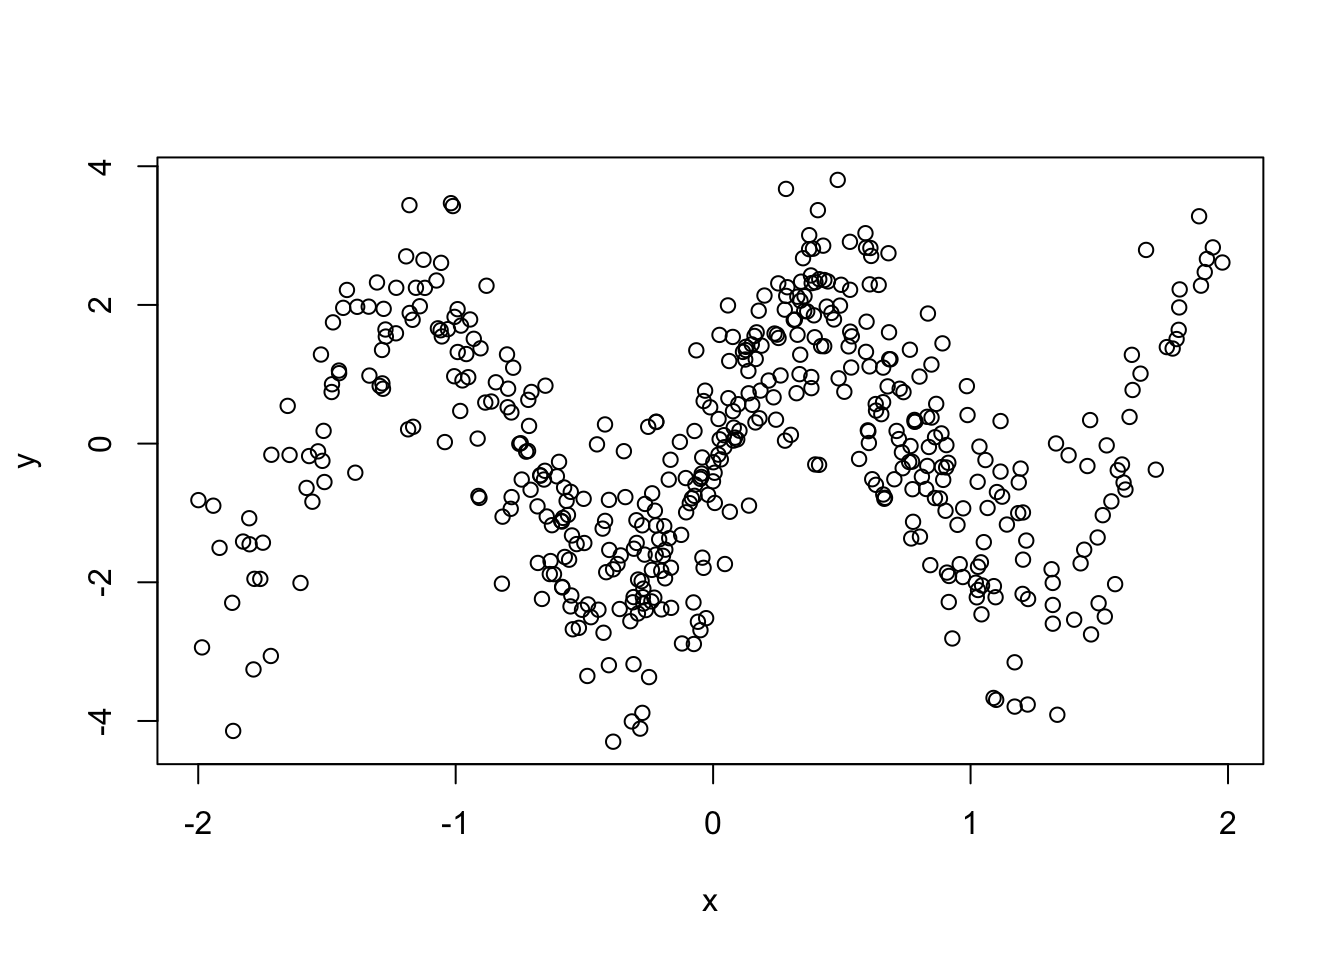 Scatterplot of simulated data showing no linear relationship.